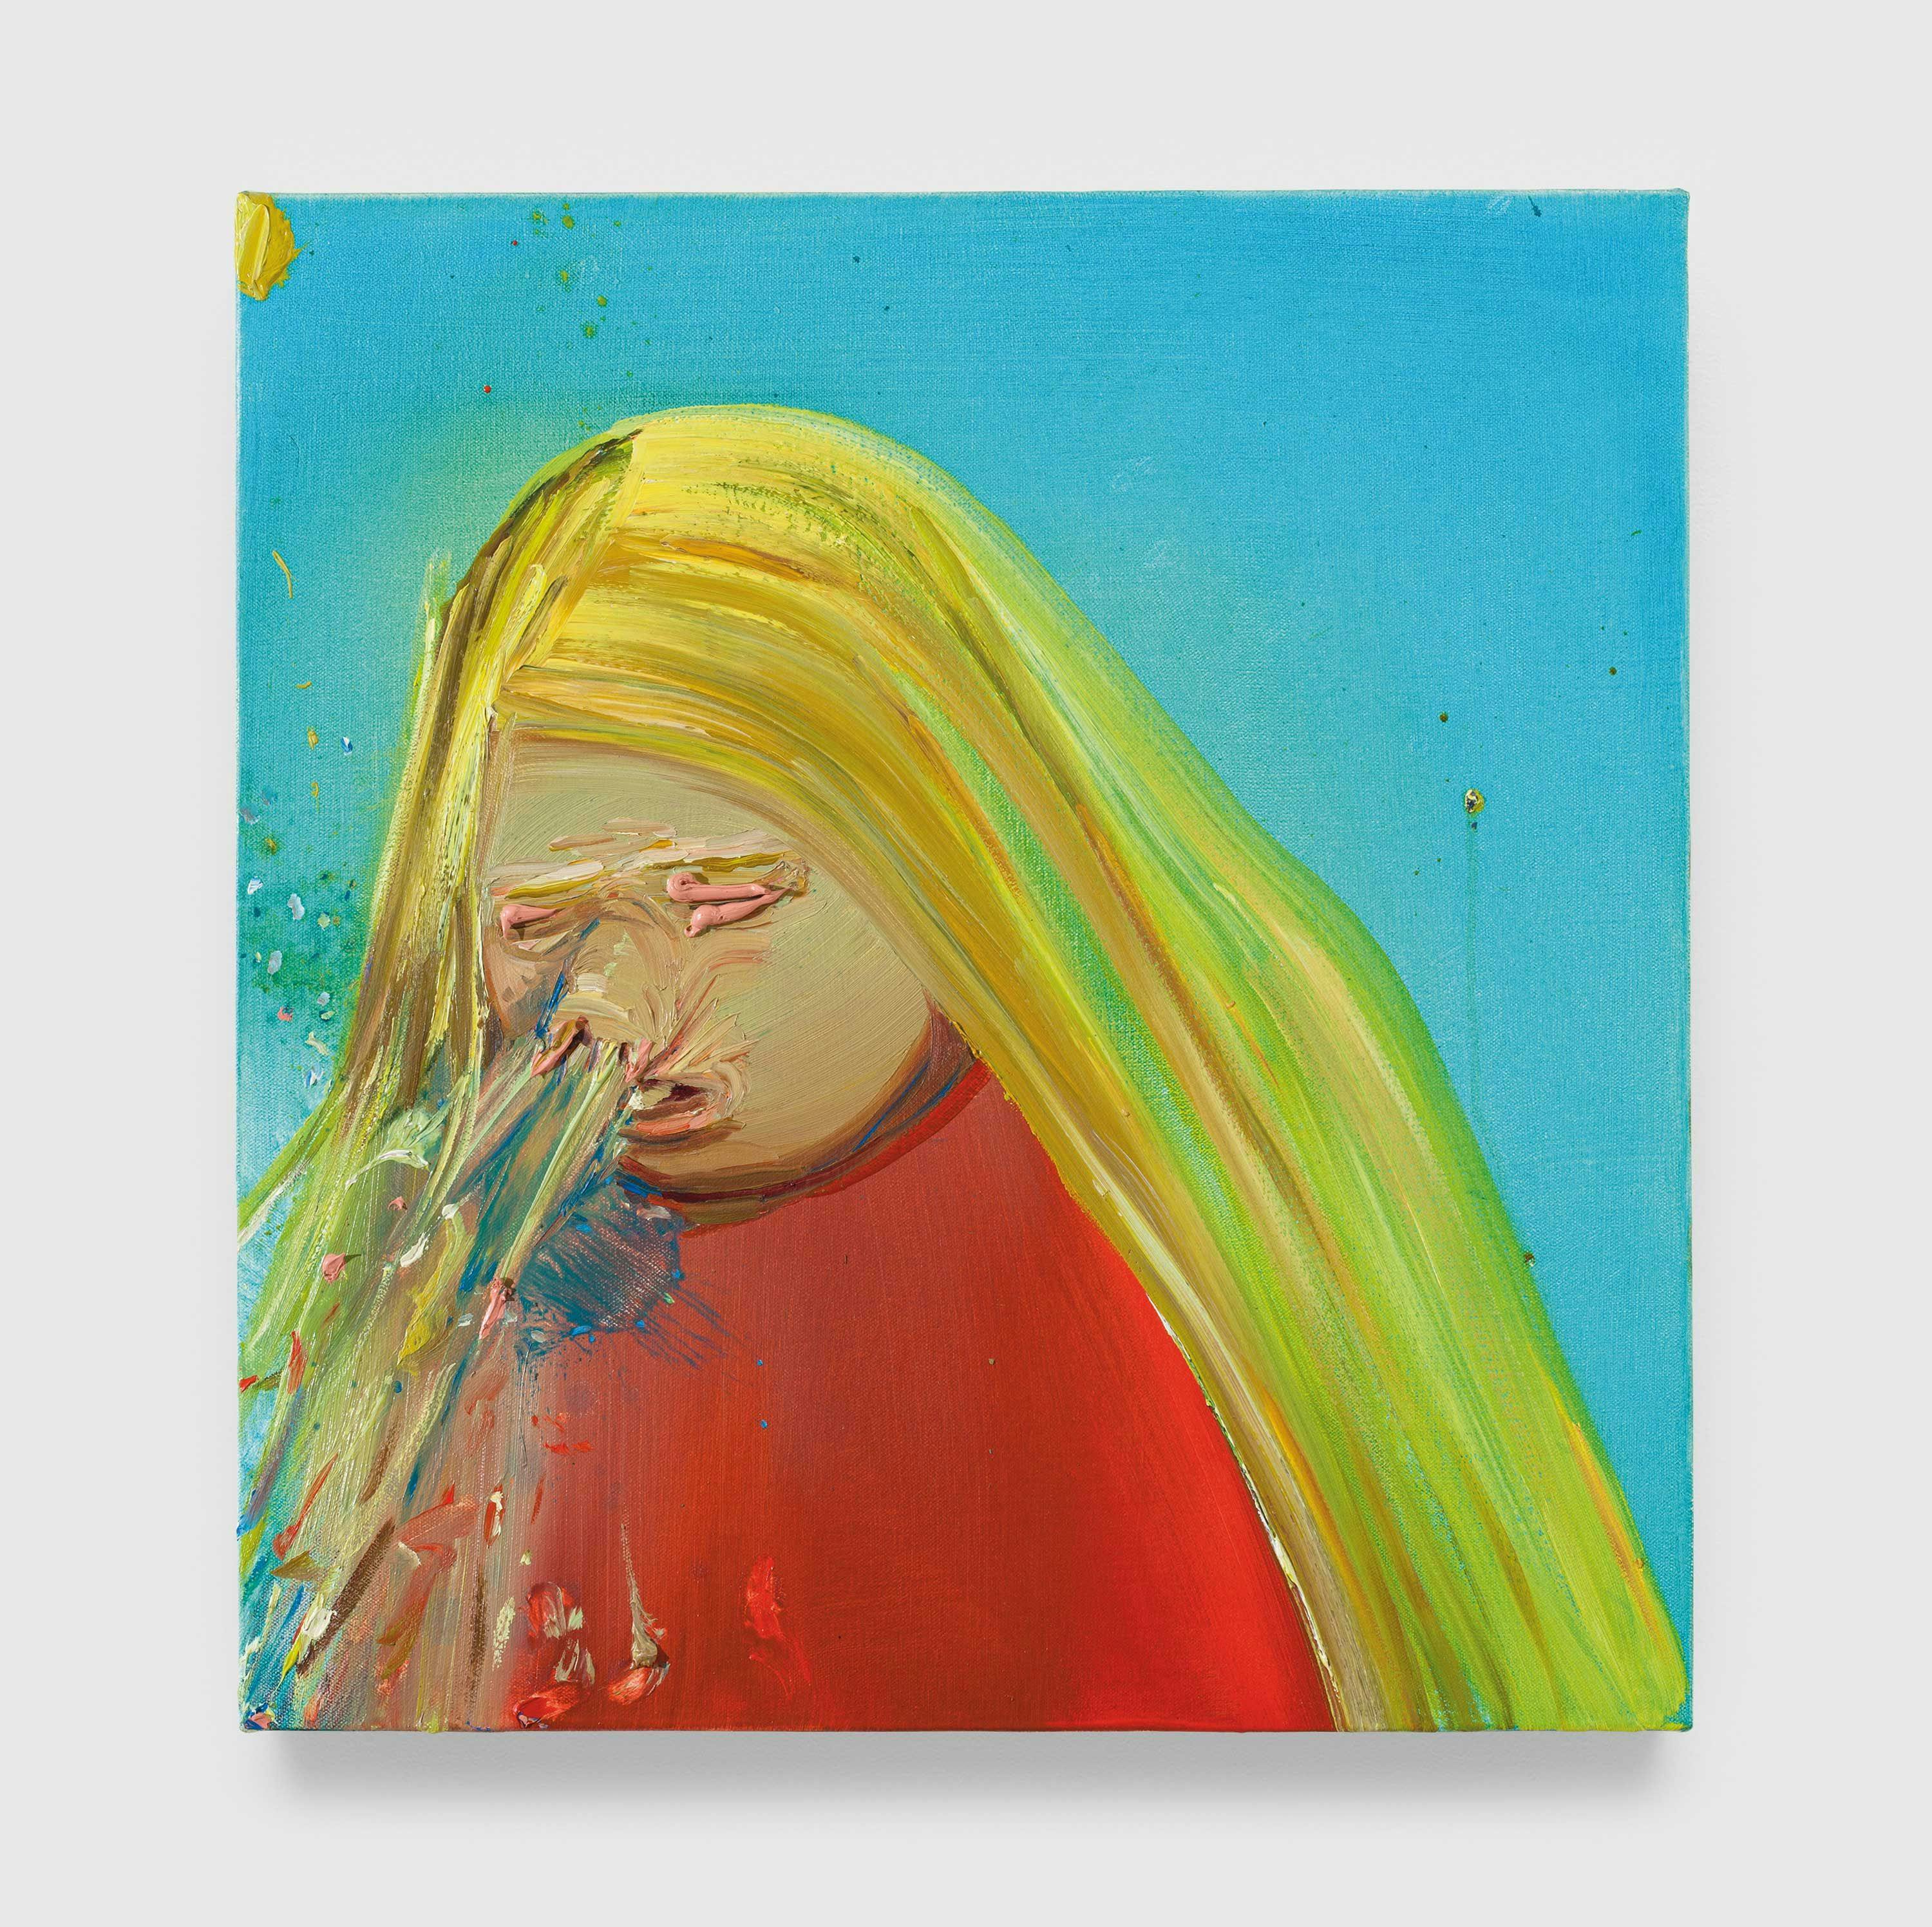 A painting by Dana Schutz, titled Sneeze, dated 2001.